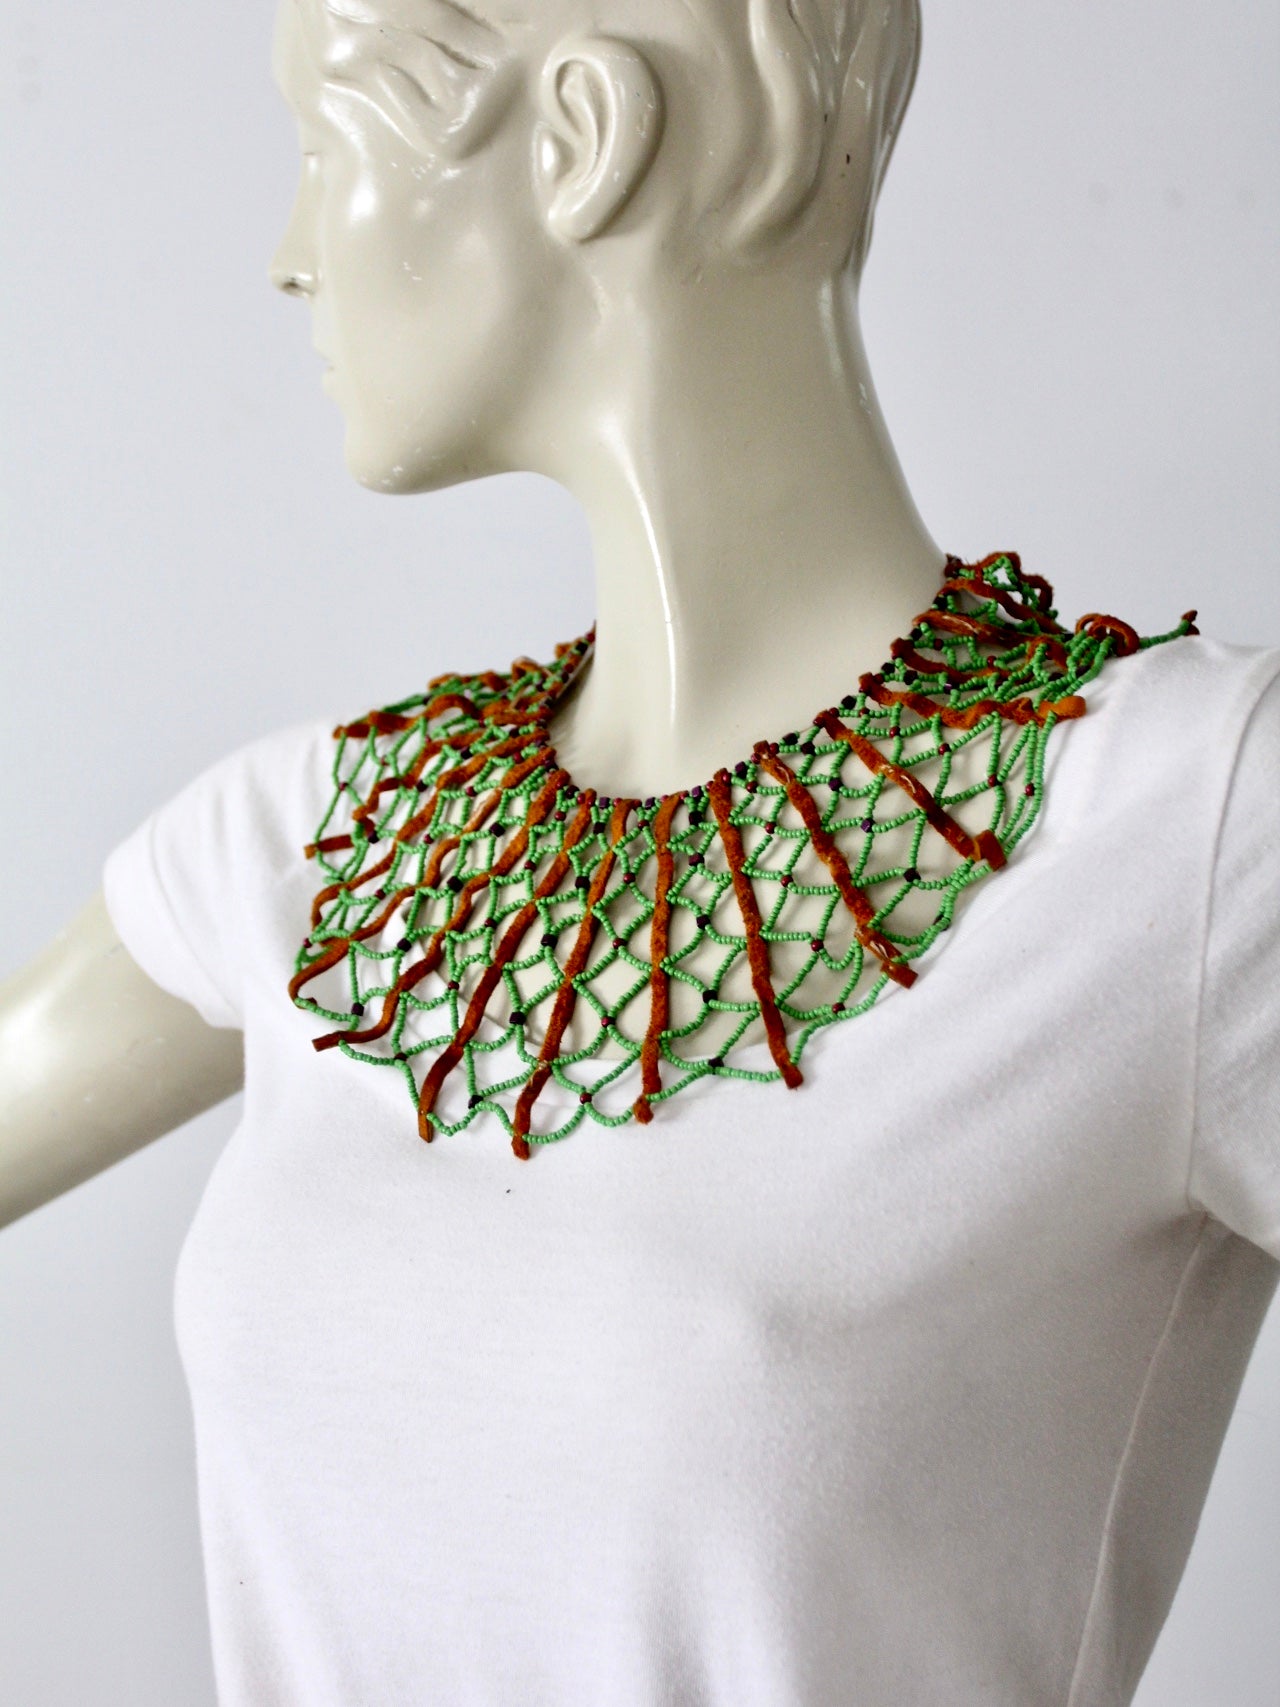 Unique Egyptian Beaded Collar Necklace With Sacred Scarabs, Handmade in  Egypt | eBay